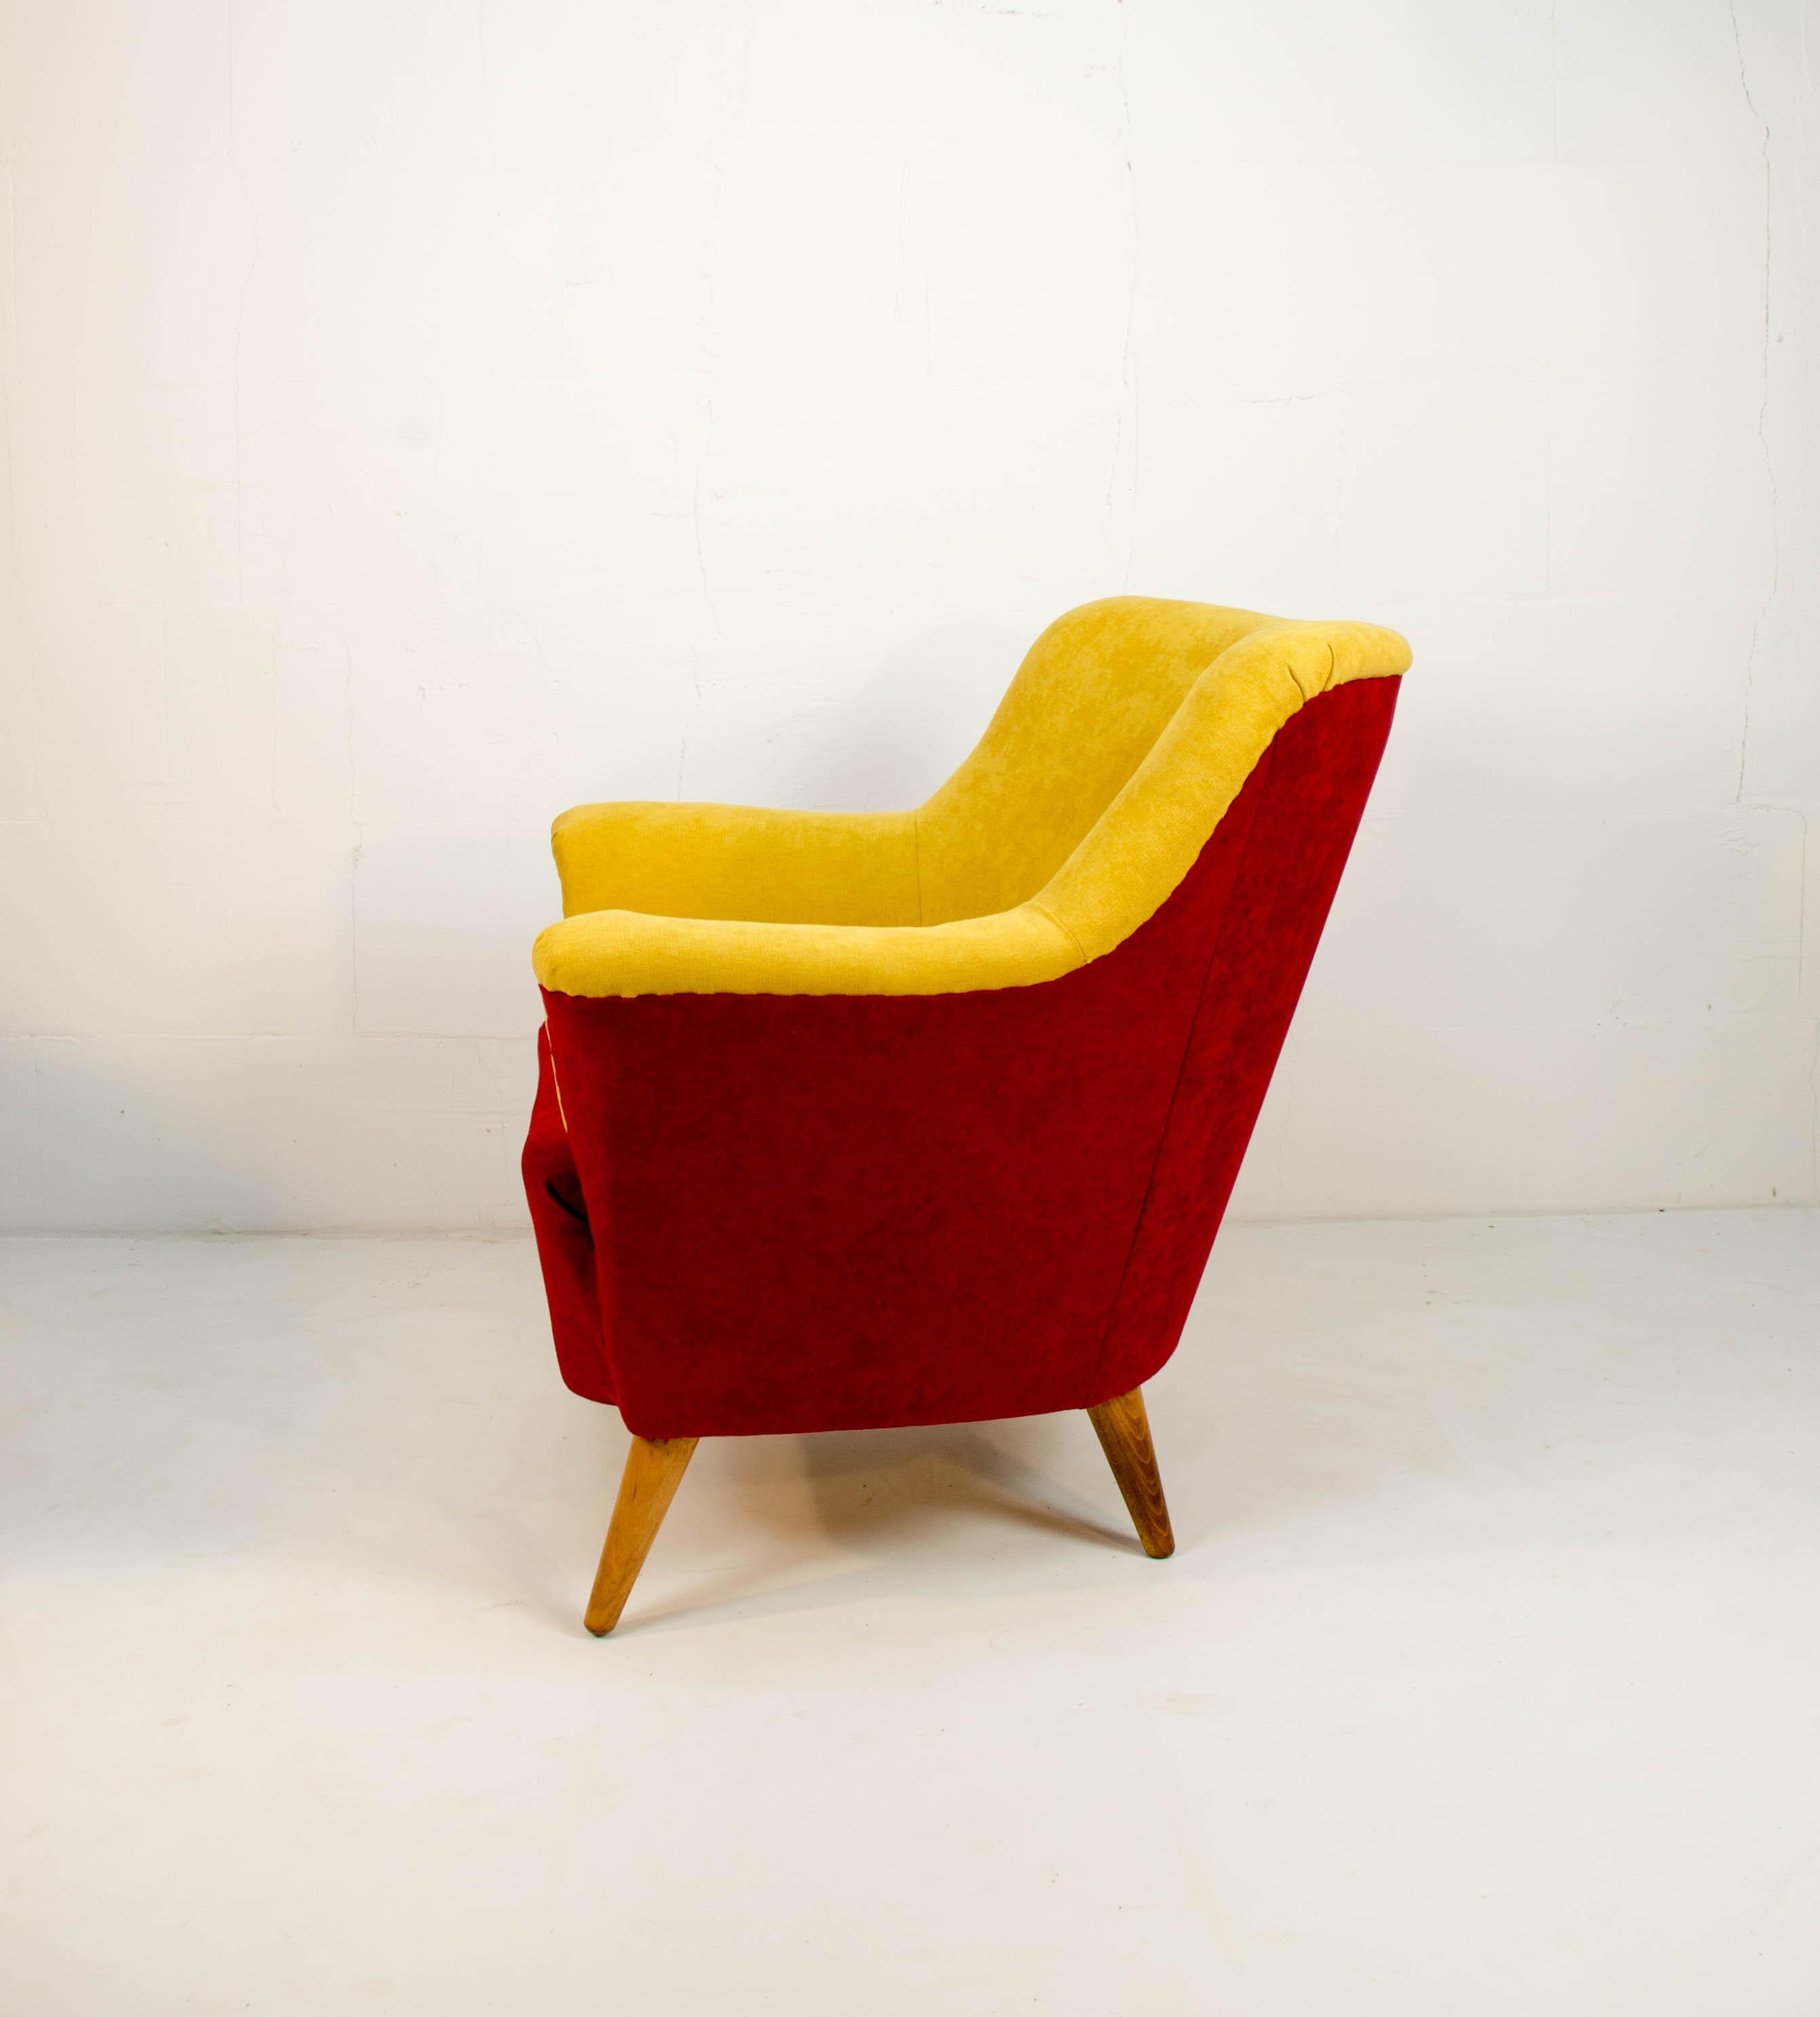 Czech Club Armchair in Red and Yellow, 1930 For Sale